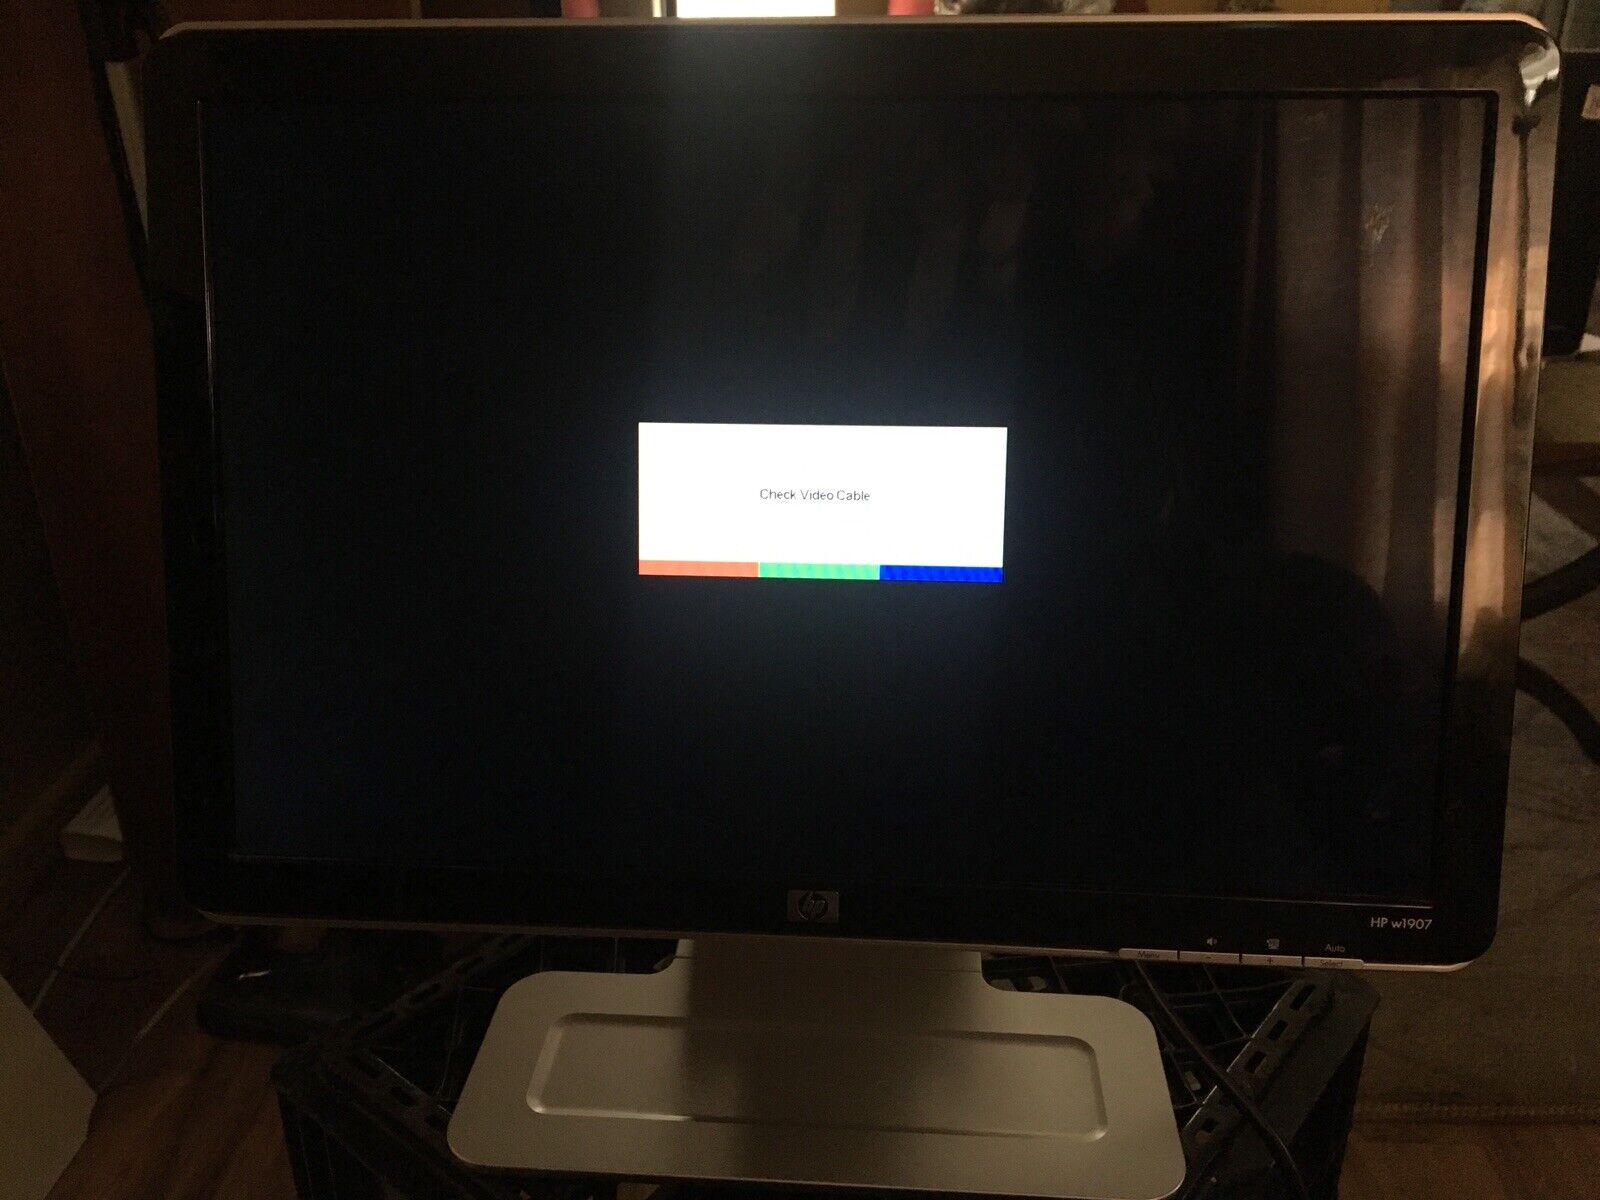 HP W1907 LCD Monitor With Power Cord